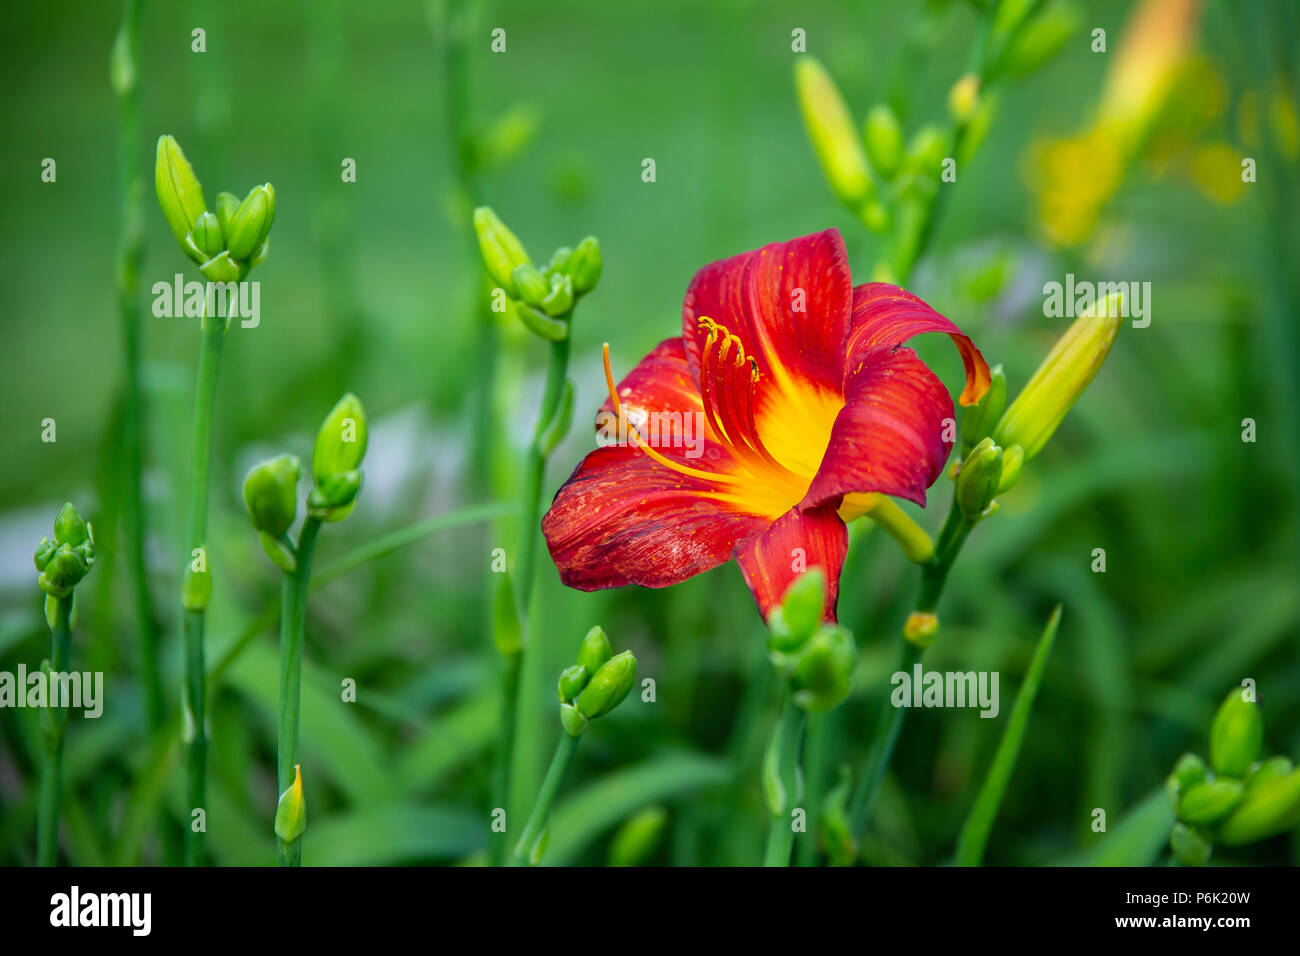 the first red yellow day lily to appear this season Stock Photo